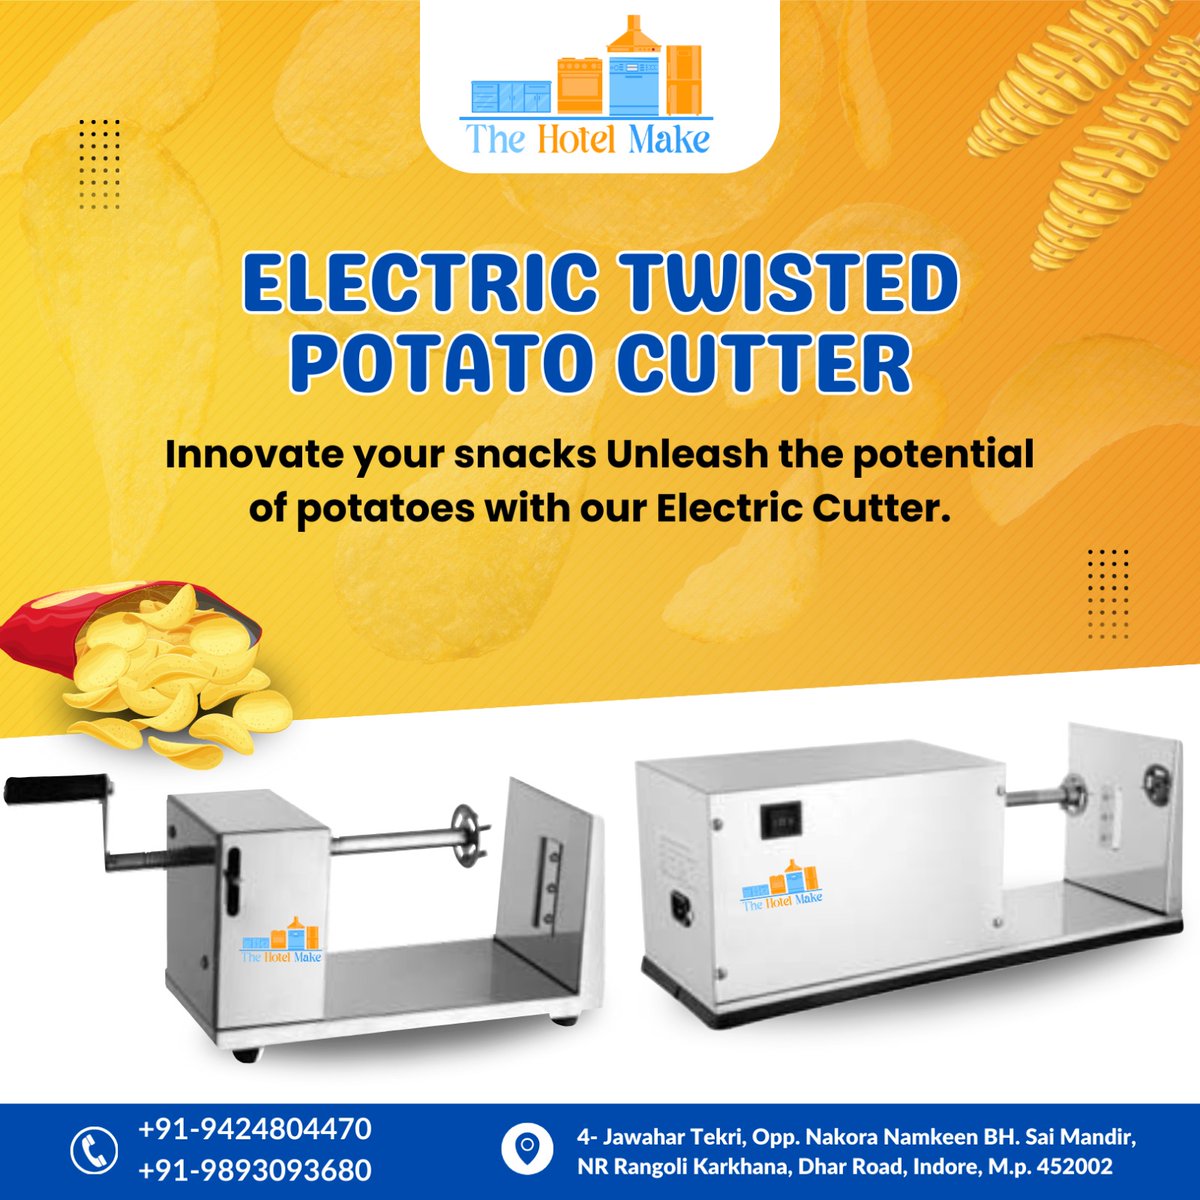 Slice, Spiral, Snack! Elevate your potato game with the Electric Twisted Potato Cutter.#TheHotelMake #TwistedPotatoMagic #SpiralSliceSavor
.
.
#PotatoPerfection #SnackTimeSensation #EasySpiralCutter #KitchenInnovation #SnackAttack #CreativeCooking #FoodieFinds #GourmetSnacks